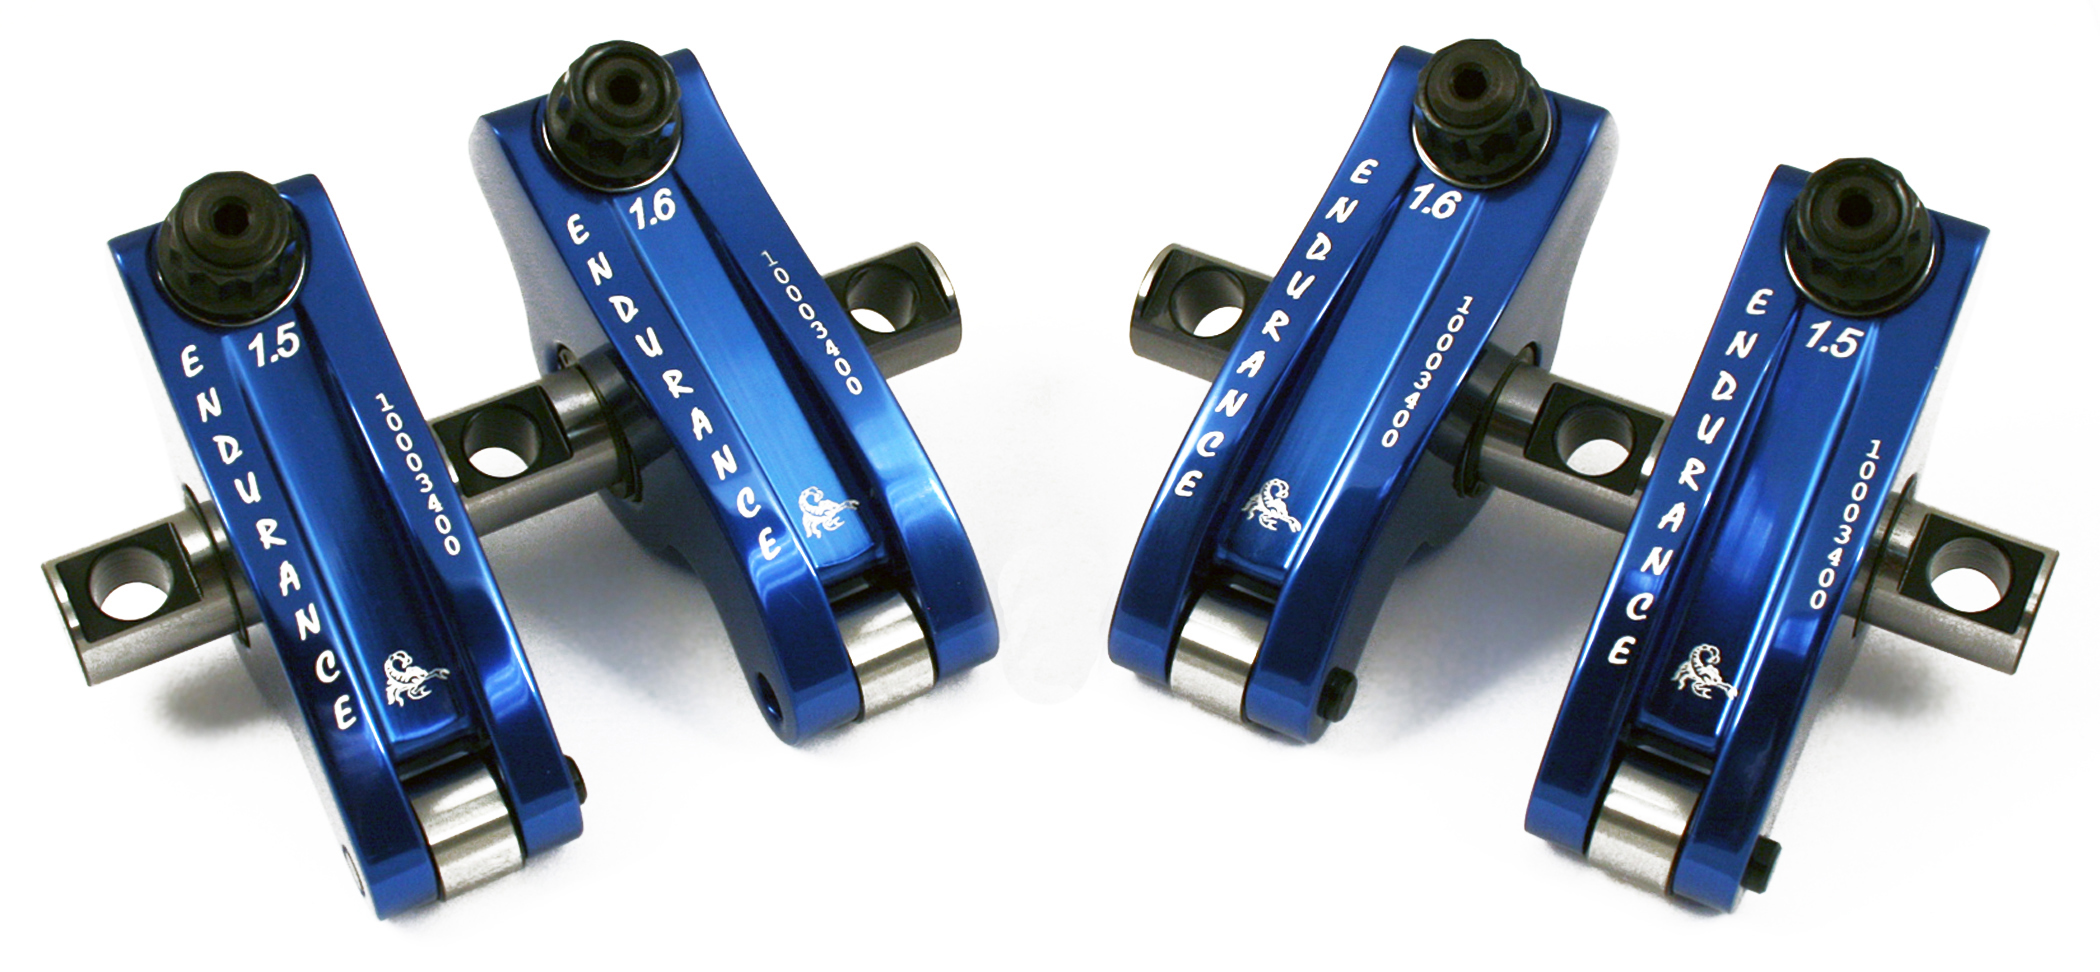 Scorpion Endurance Series Rocker Arms for Small Block Chevy, 1.5 Ratio